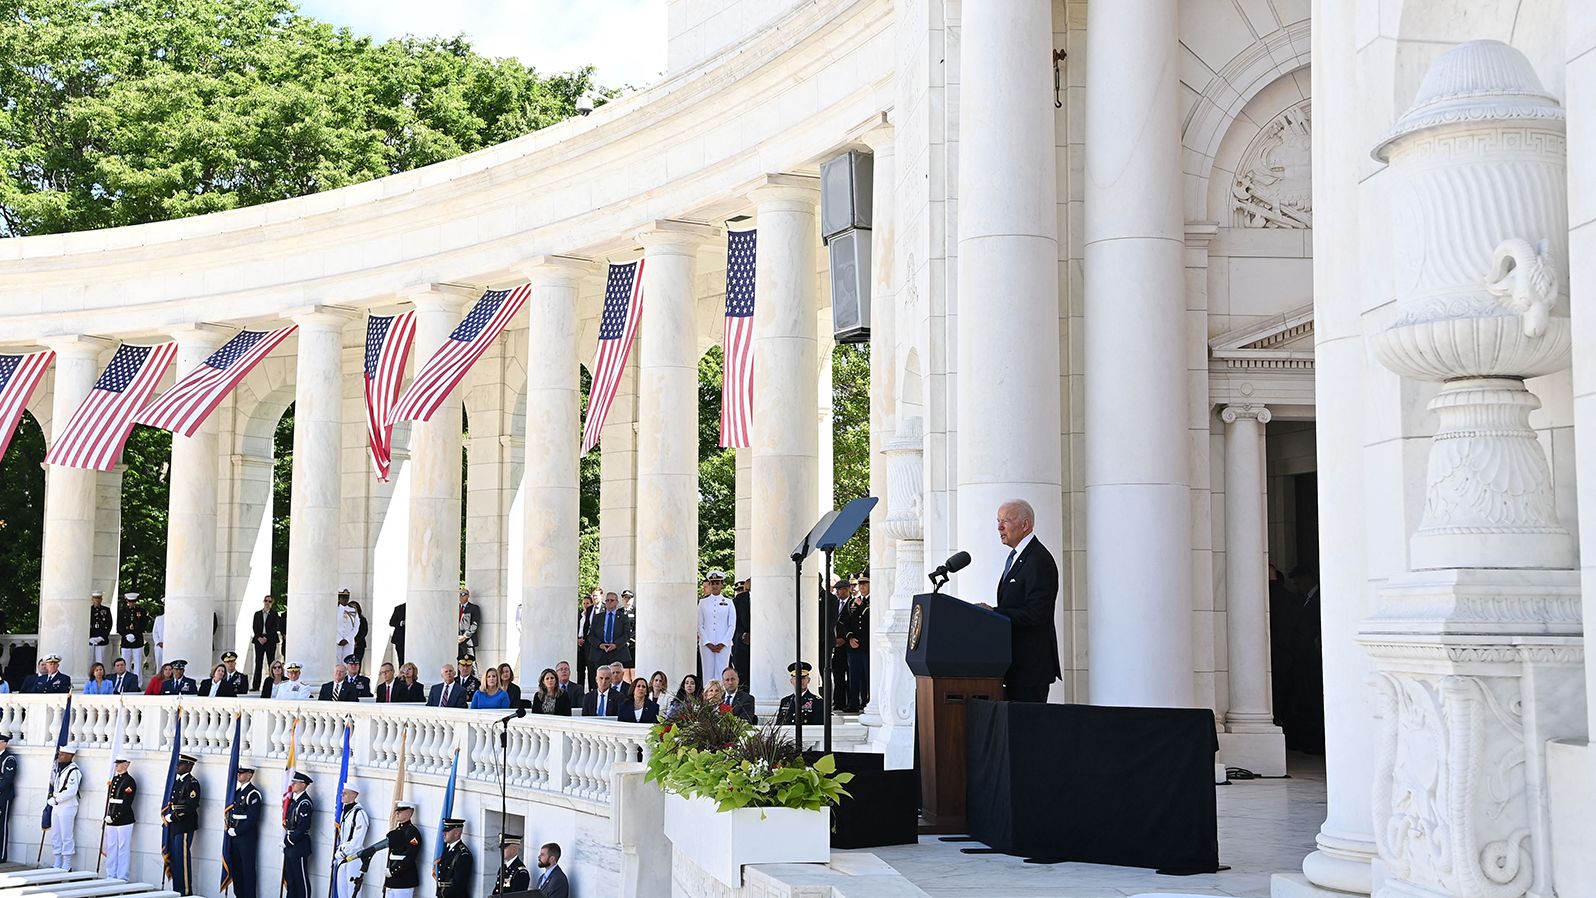 President Joe Biden delivers an address at  Arlington National Cemetery on Monday. "We owe the honored dead a debt we can never fully repay," he said in <a href="https://www.cnn.com/2021/05/31/politics/biden-memorial-day/index.html" target="_blank">his speech.</a> "We owe them our whole souls. We owe them our full best efforts to perfect the union for which they died."